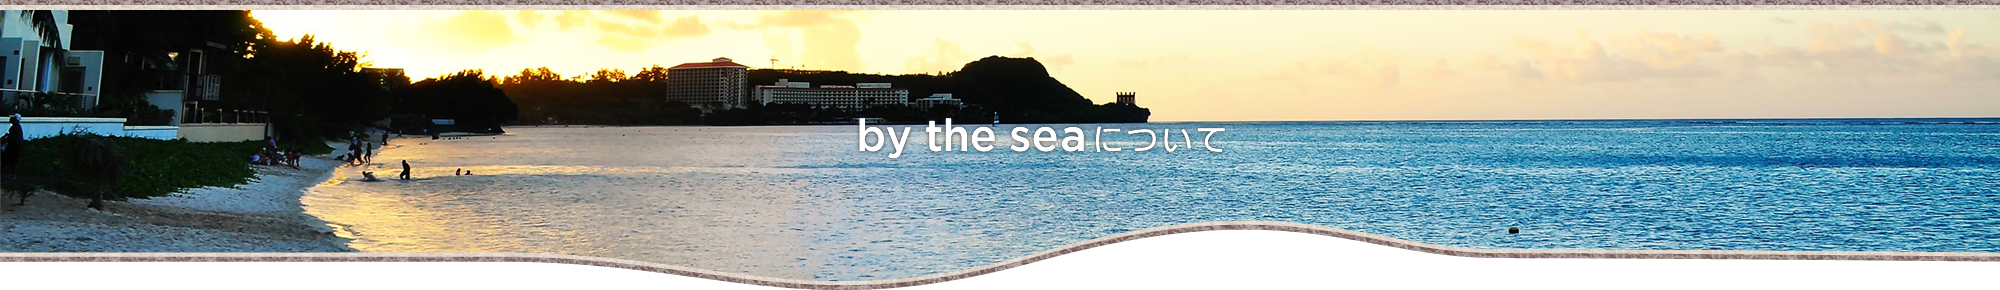 by the seaについて